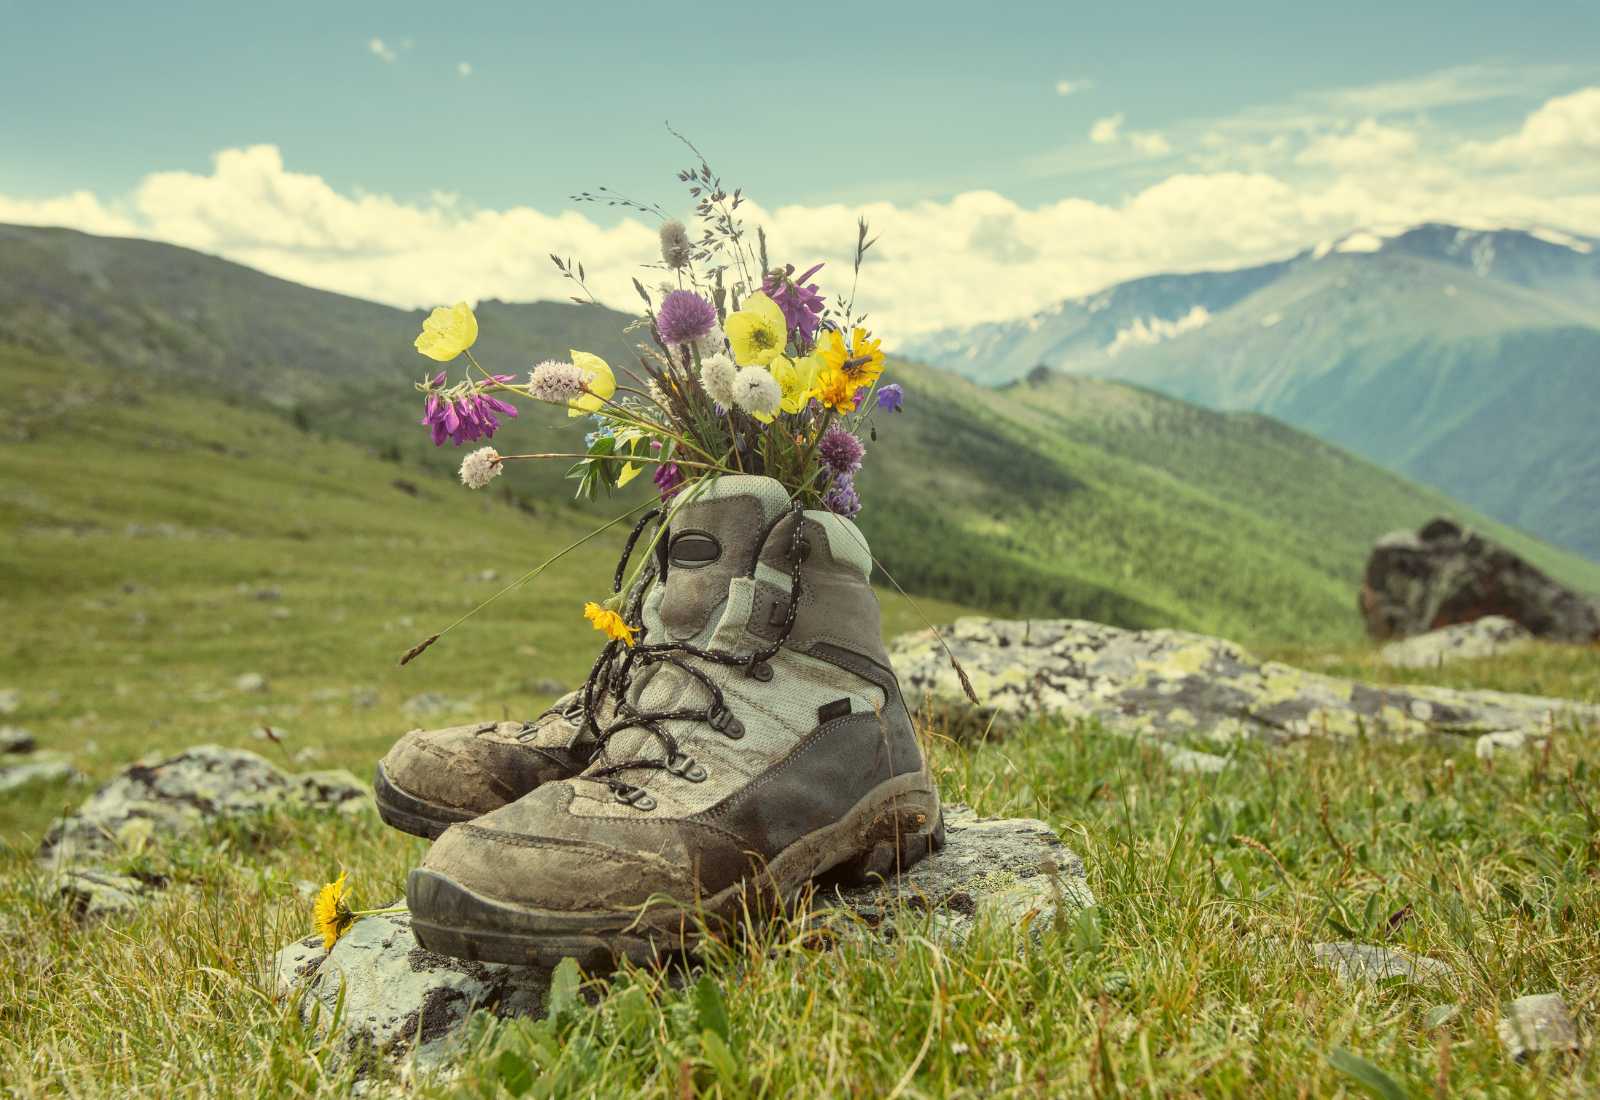 Boots with flowers in springtime.